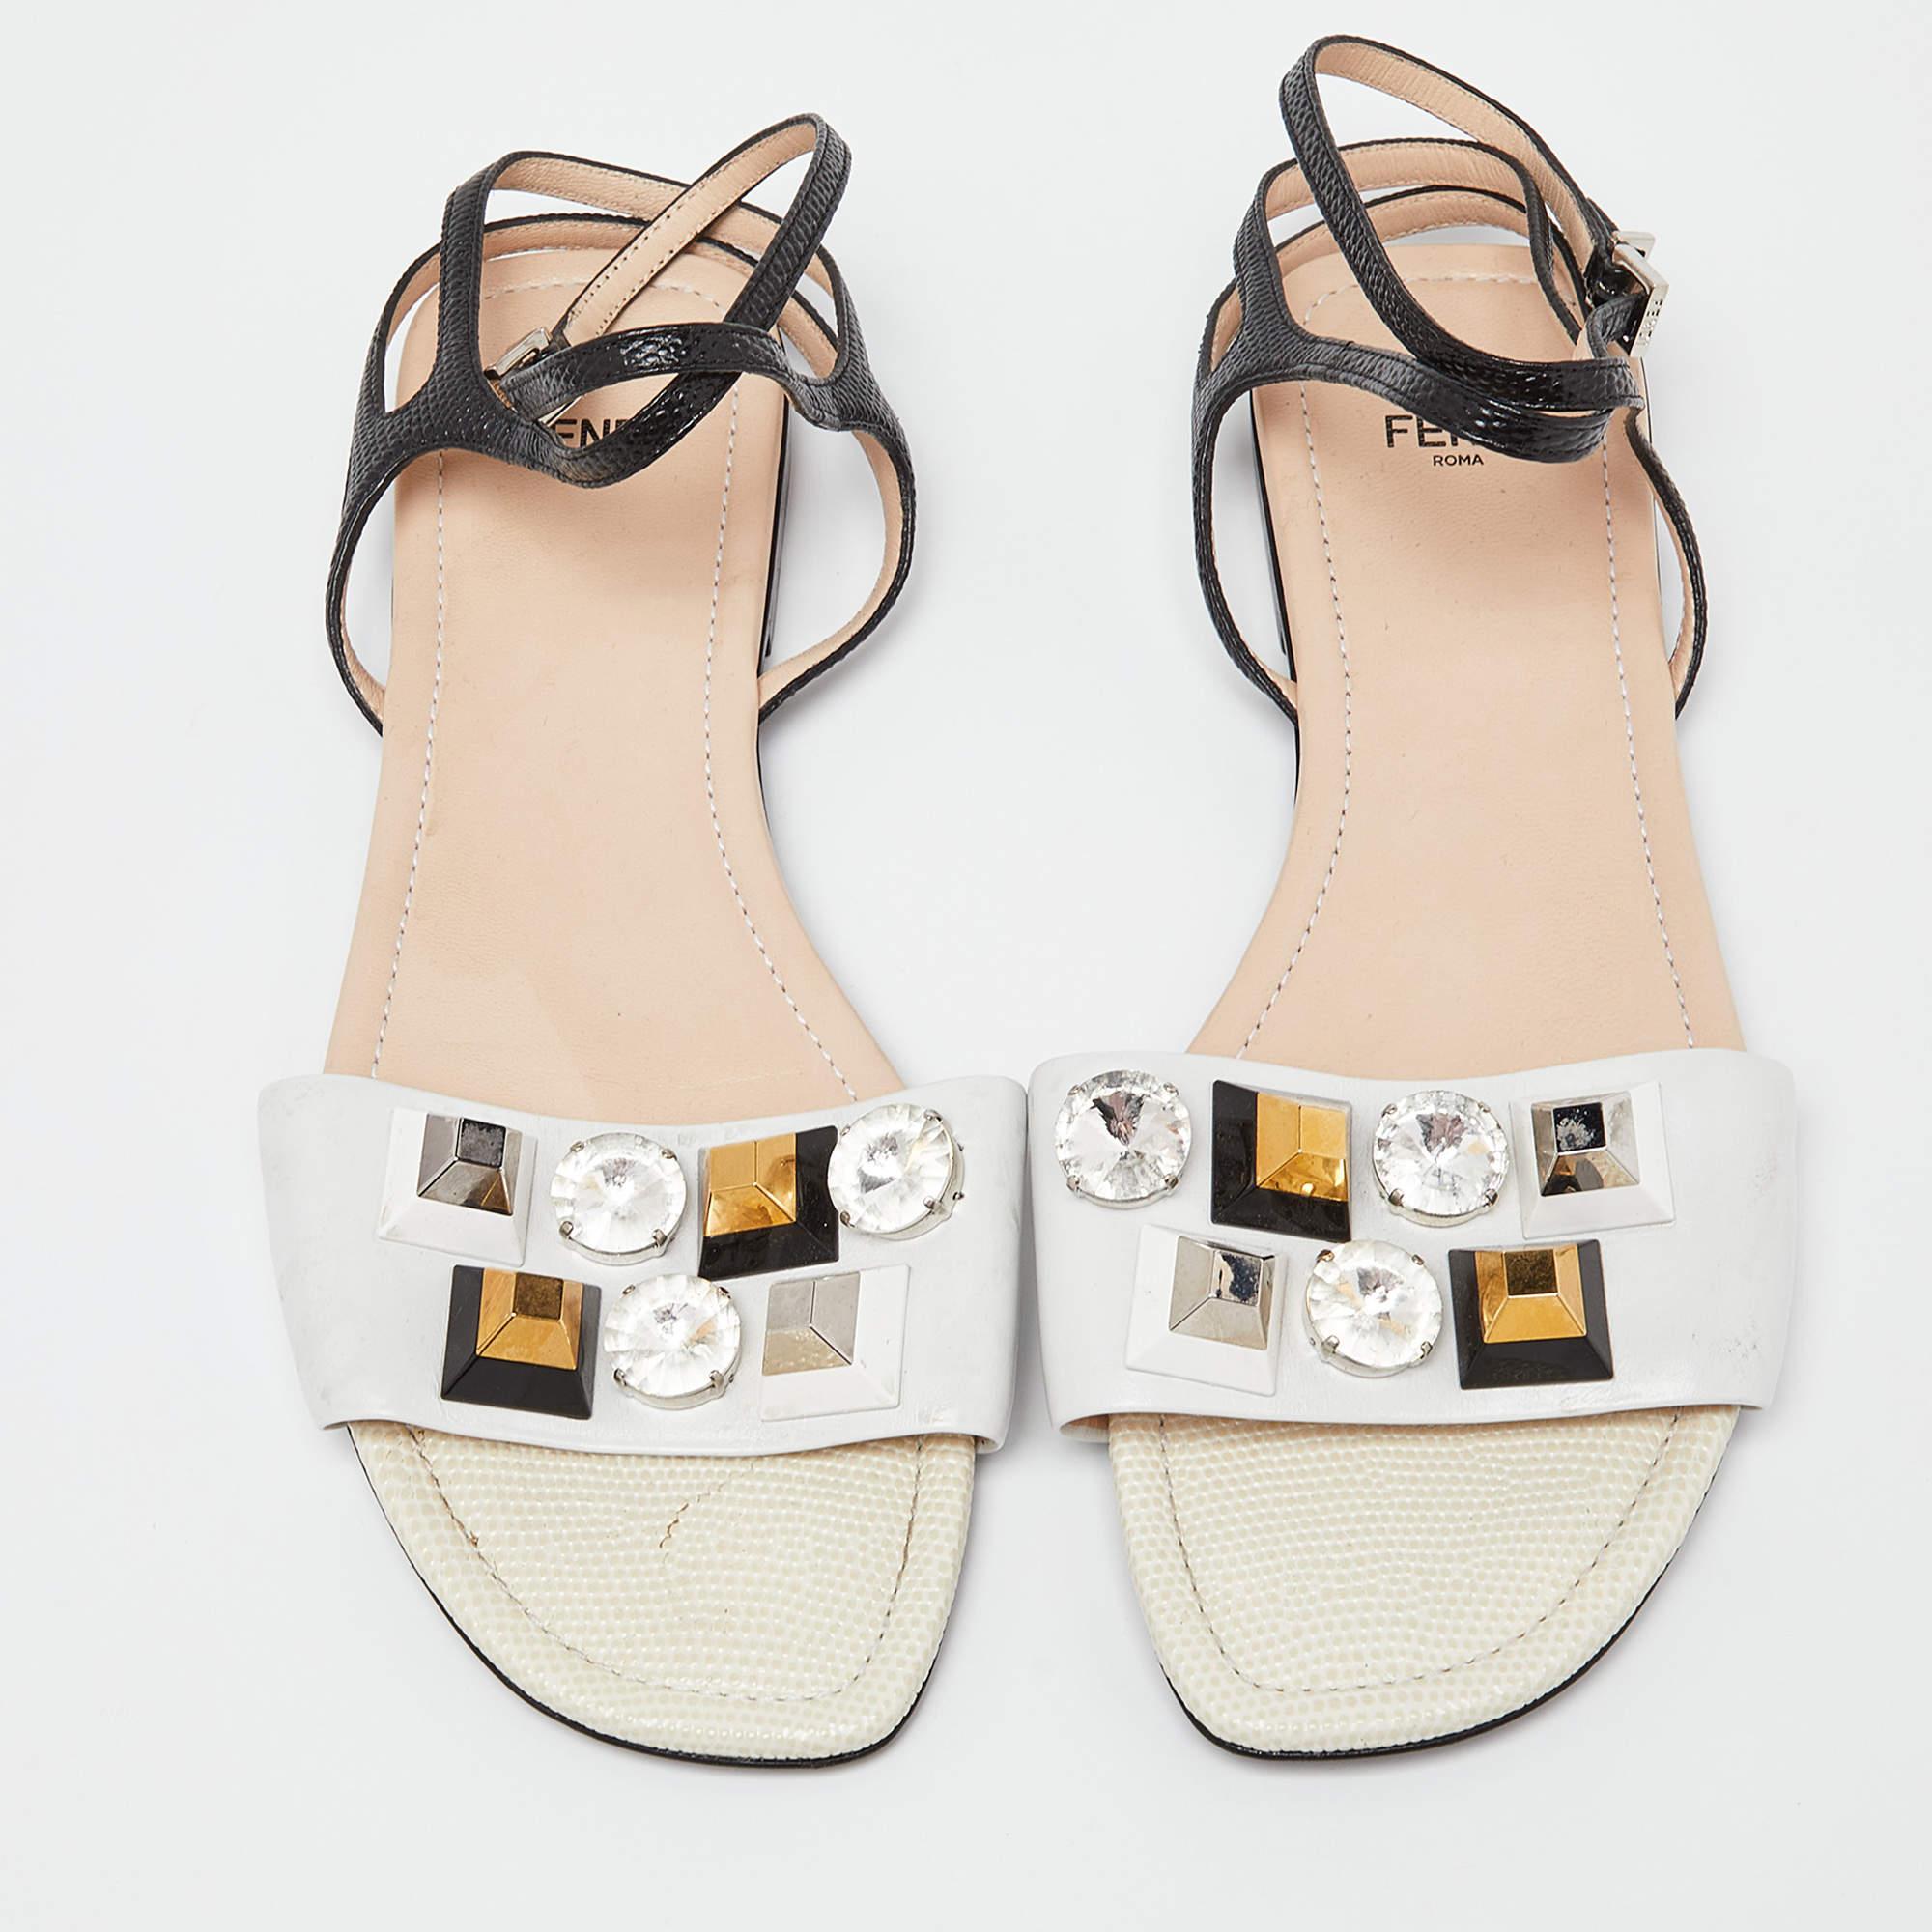 Fendi Tri Color Studded Leather and Lizard Embossed Flat Ankle Strap Sandals Siz In Good Condition For Sale In Dubai, Al Qouz 2